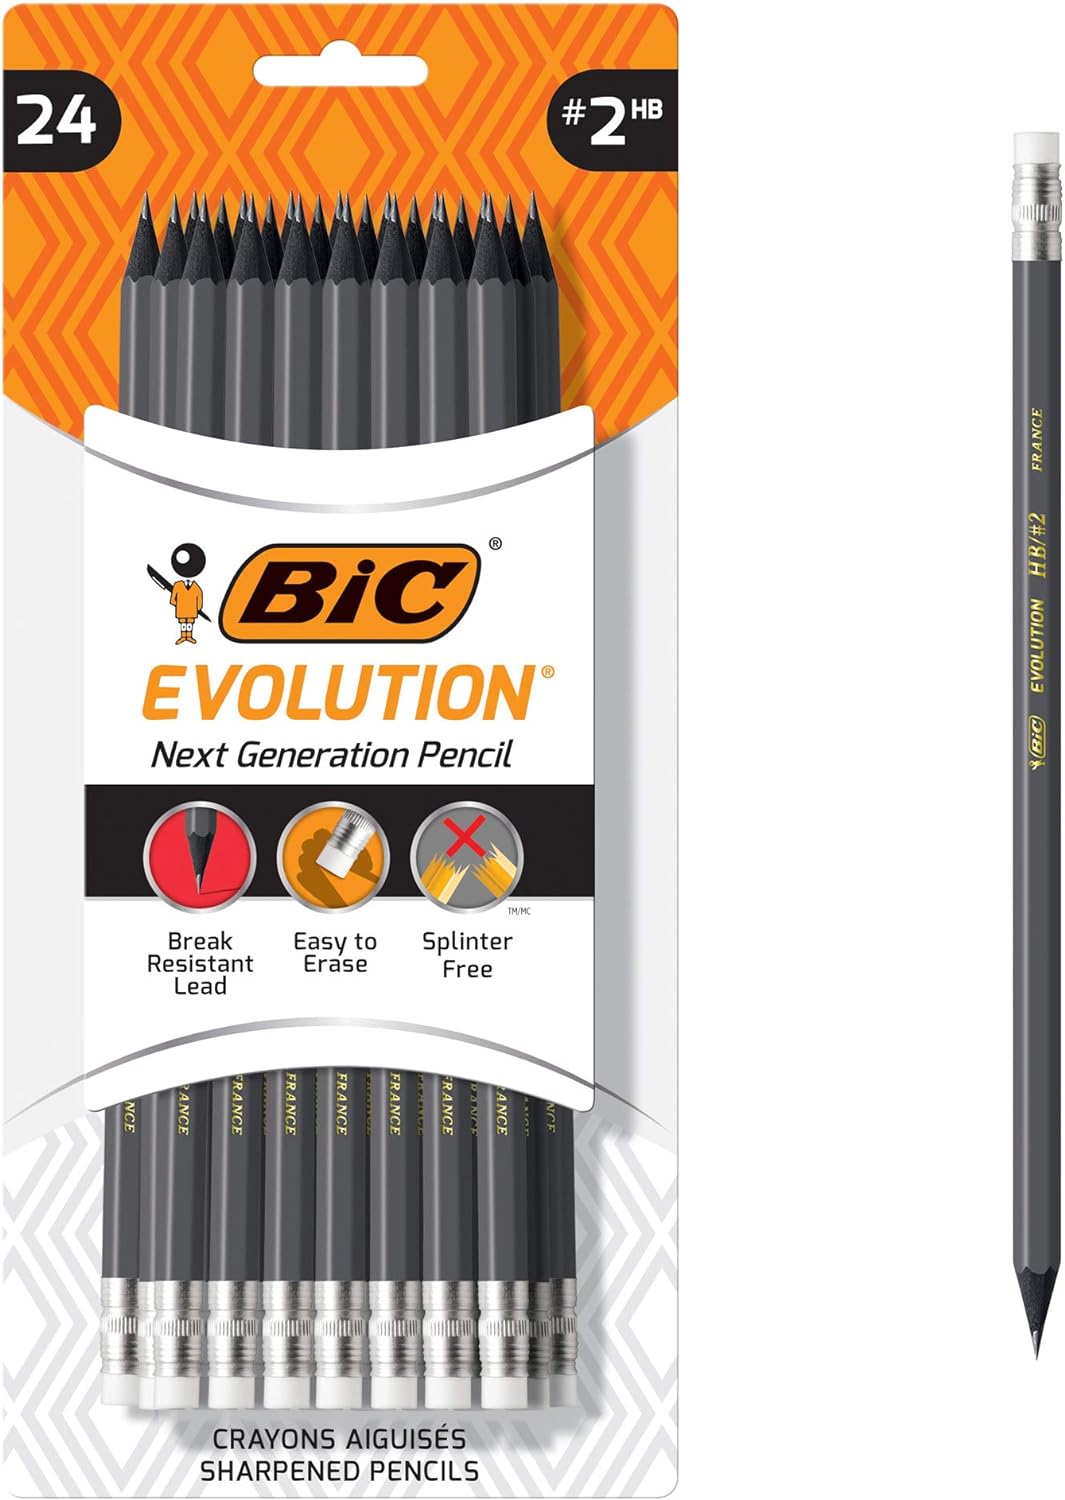 Always love a great Bic product, they are soft material which makes writing difficult for heavy handed people. Overall good pencils but just a word of advice they are soft.